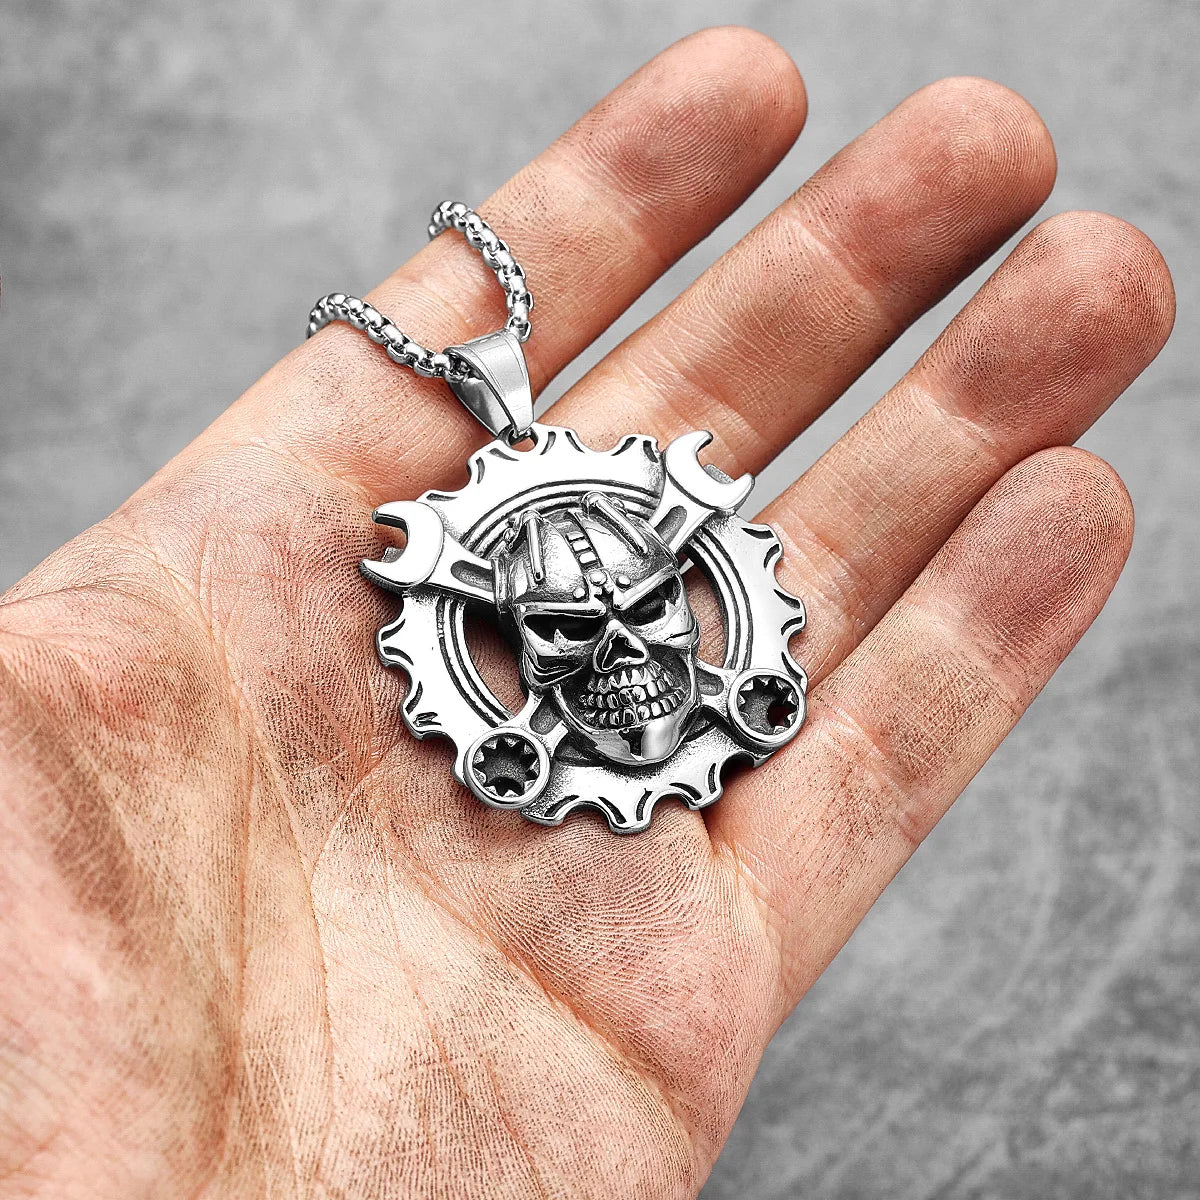 Vleee Mechanical Wrench Gear Skull Necklace: Stainless Steel Pendant Chain for Men and Women, Perfect for Punk Motorcycle Style.